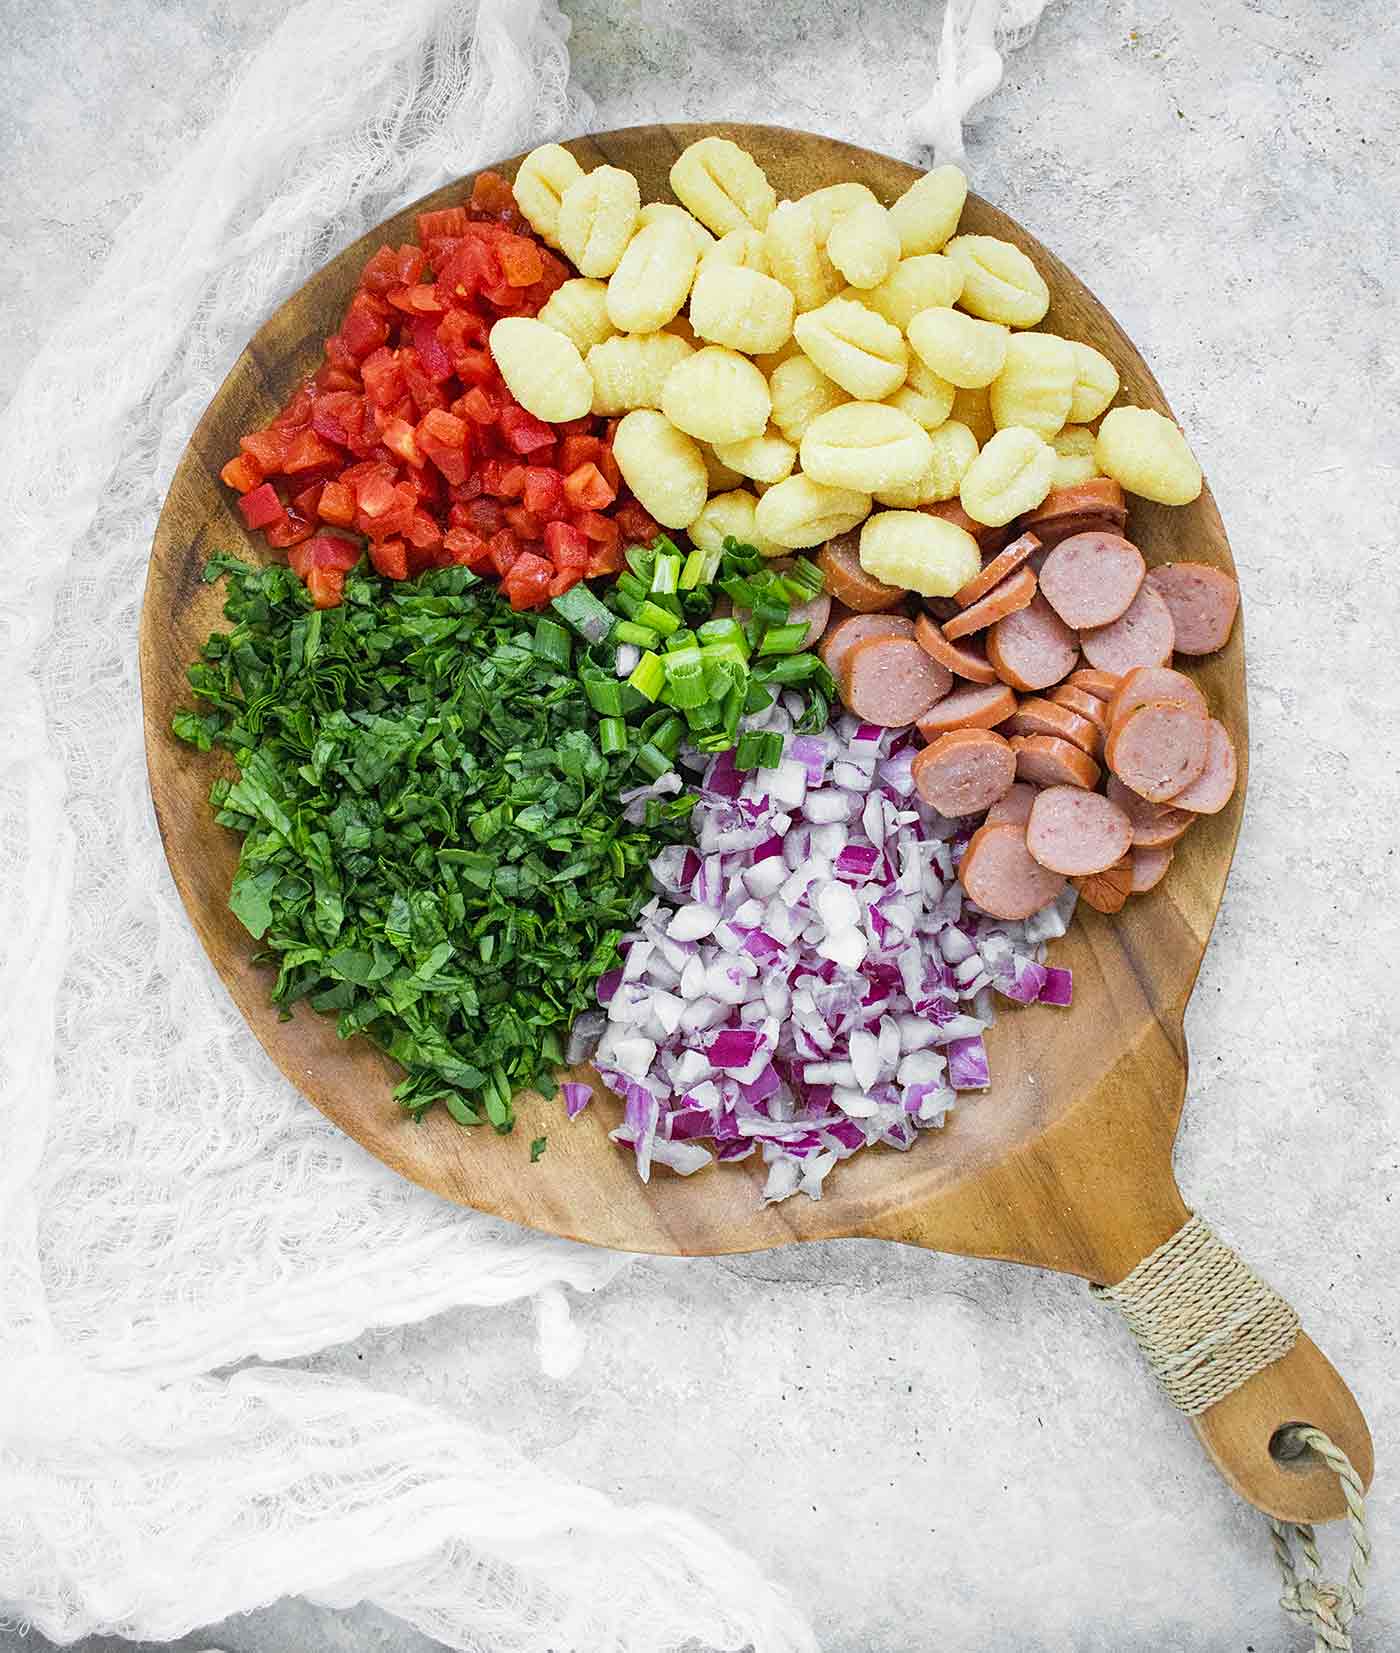 Ingredients for Smoke Sausage & Gnocchi on a wooden board